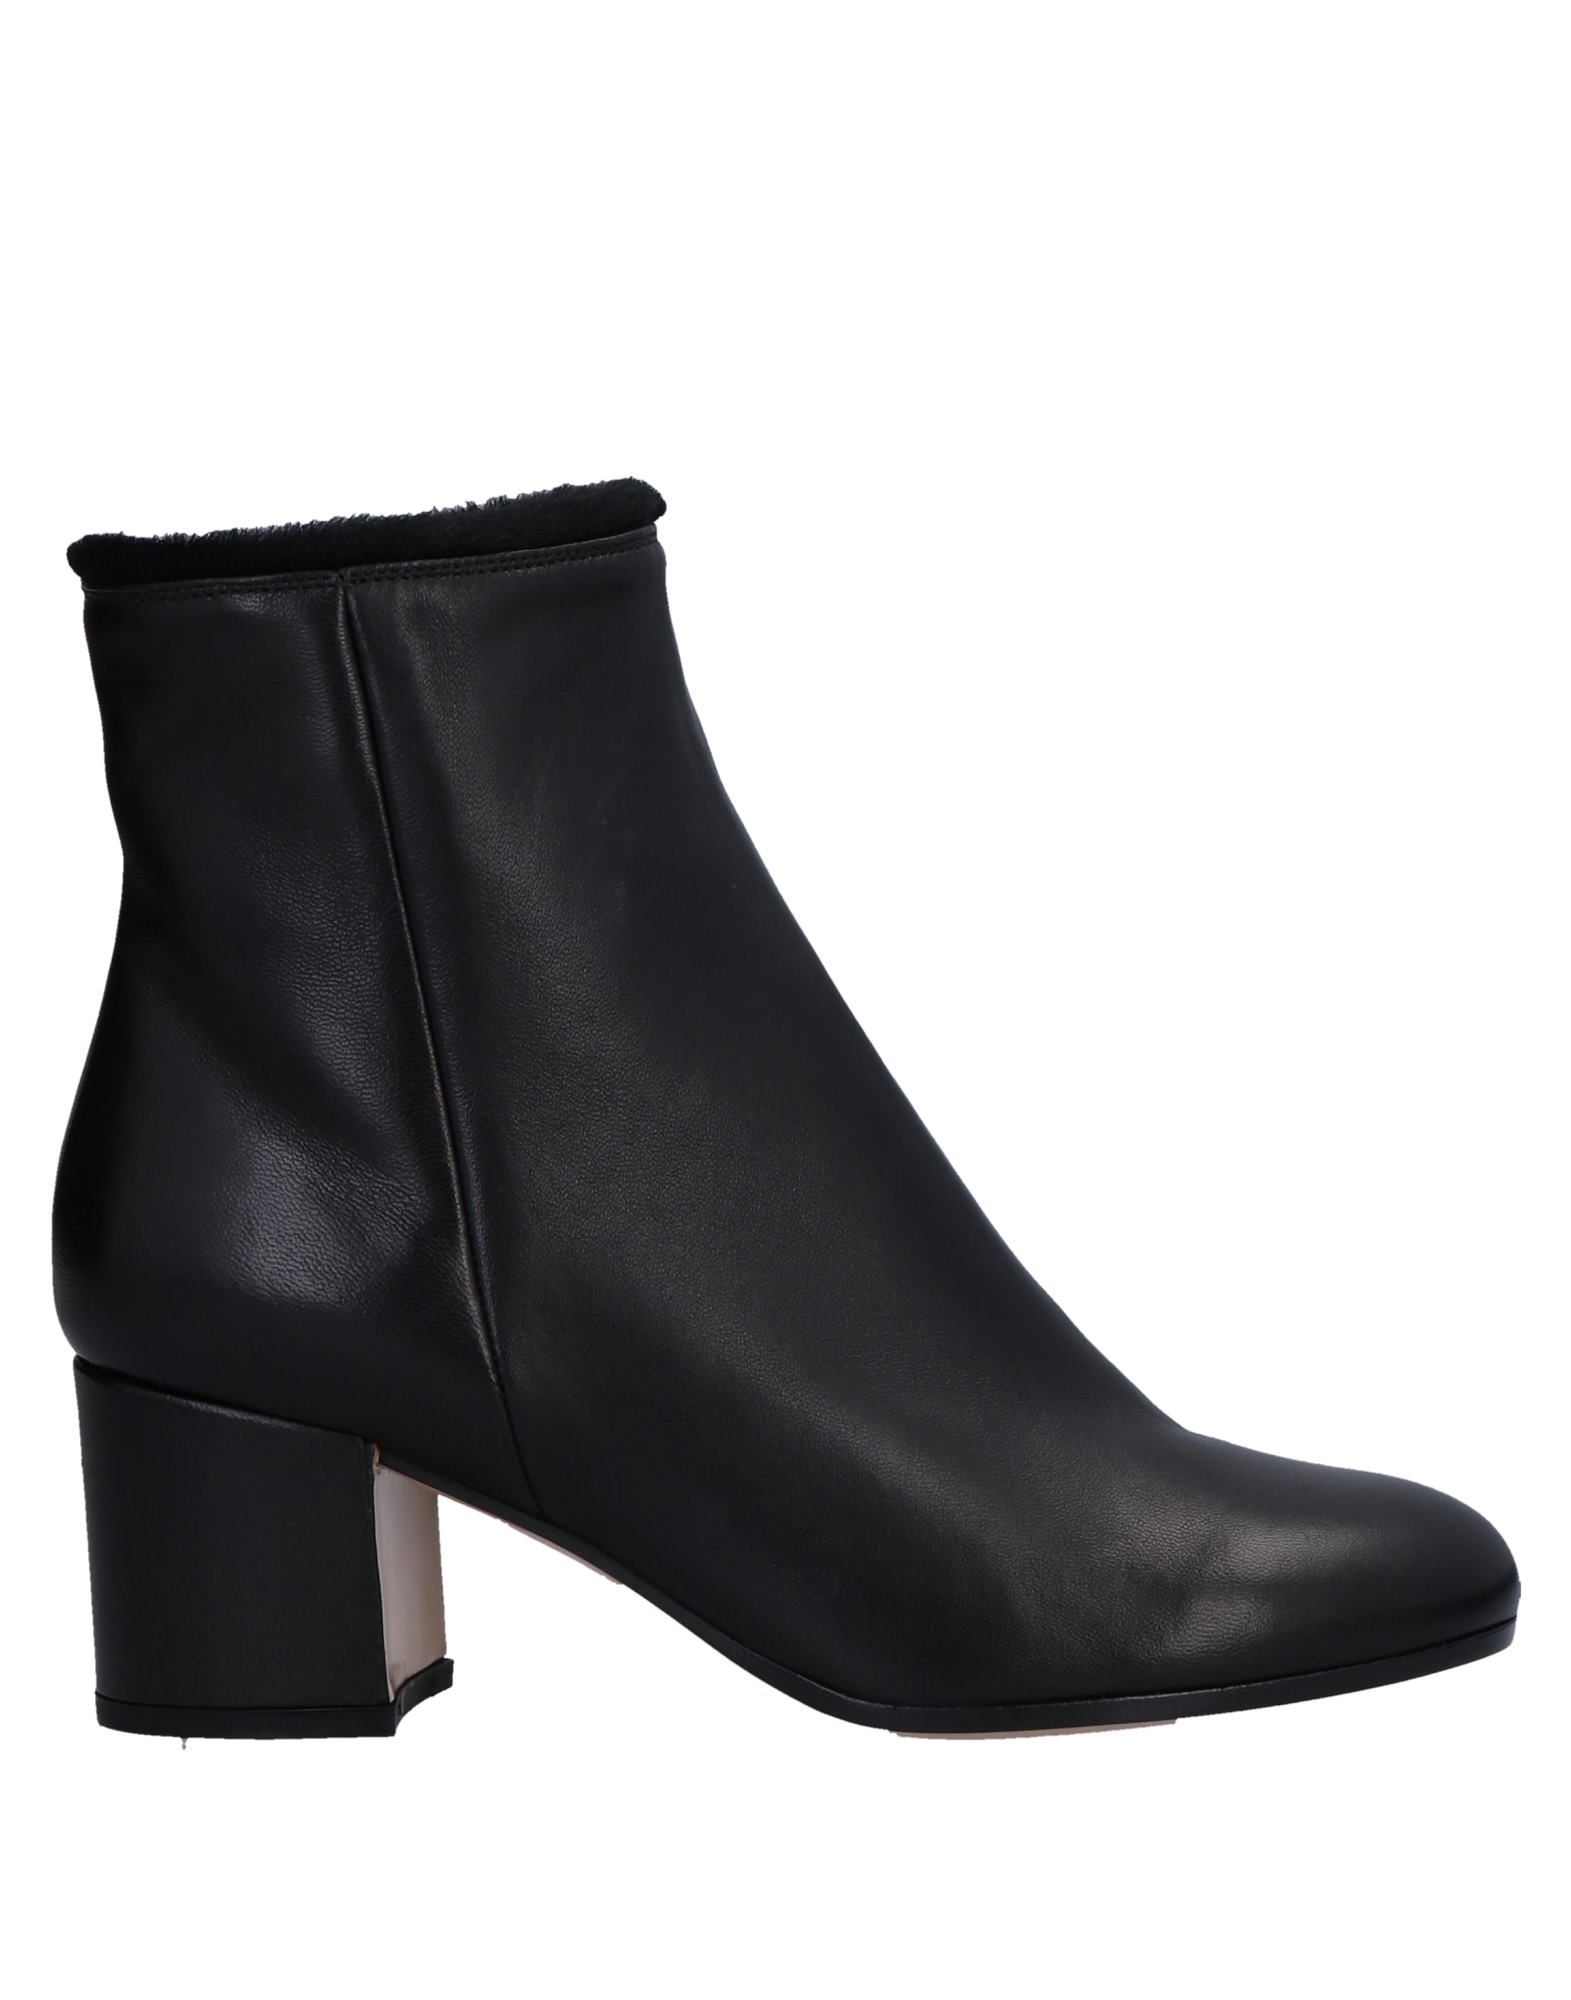 GIANVITO ROSSI Ankle boots - Item 11973008